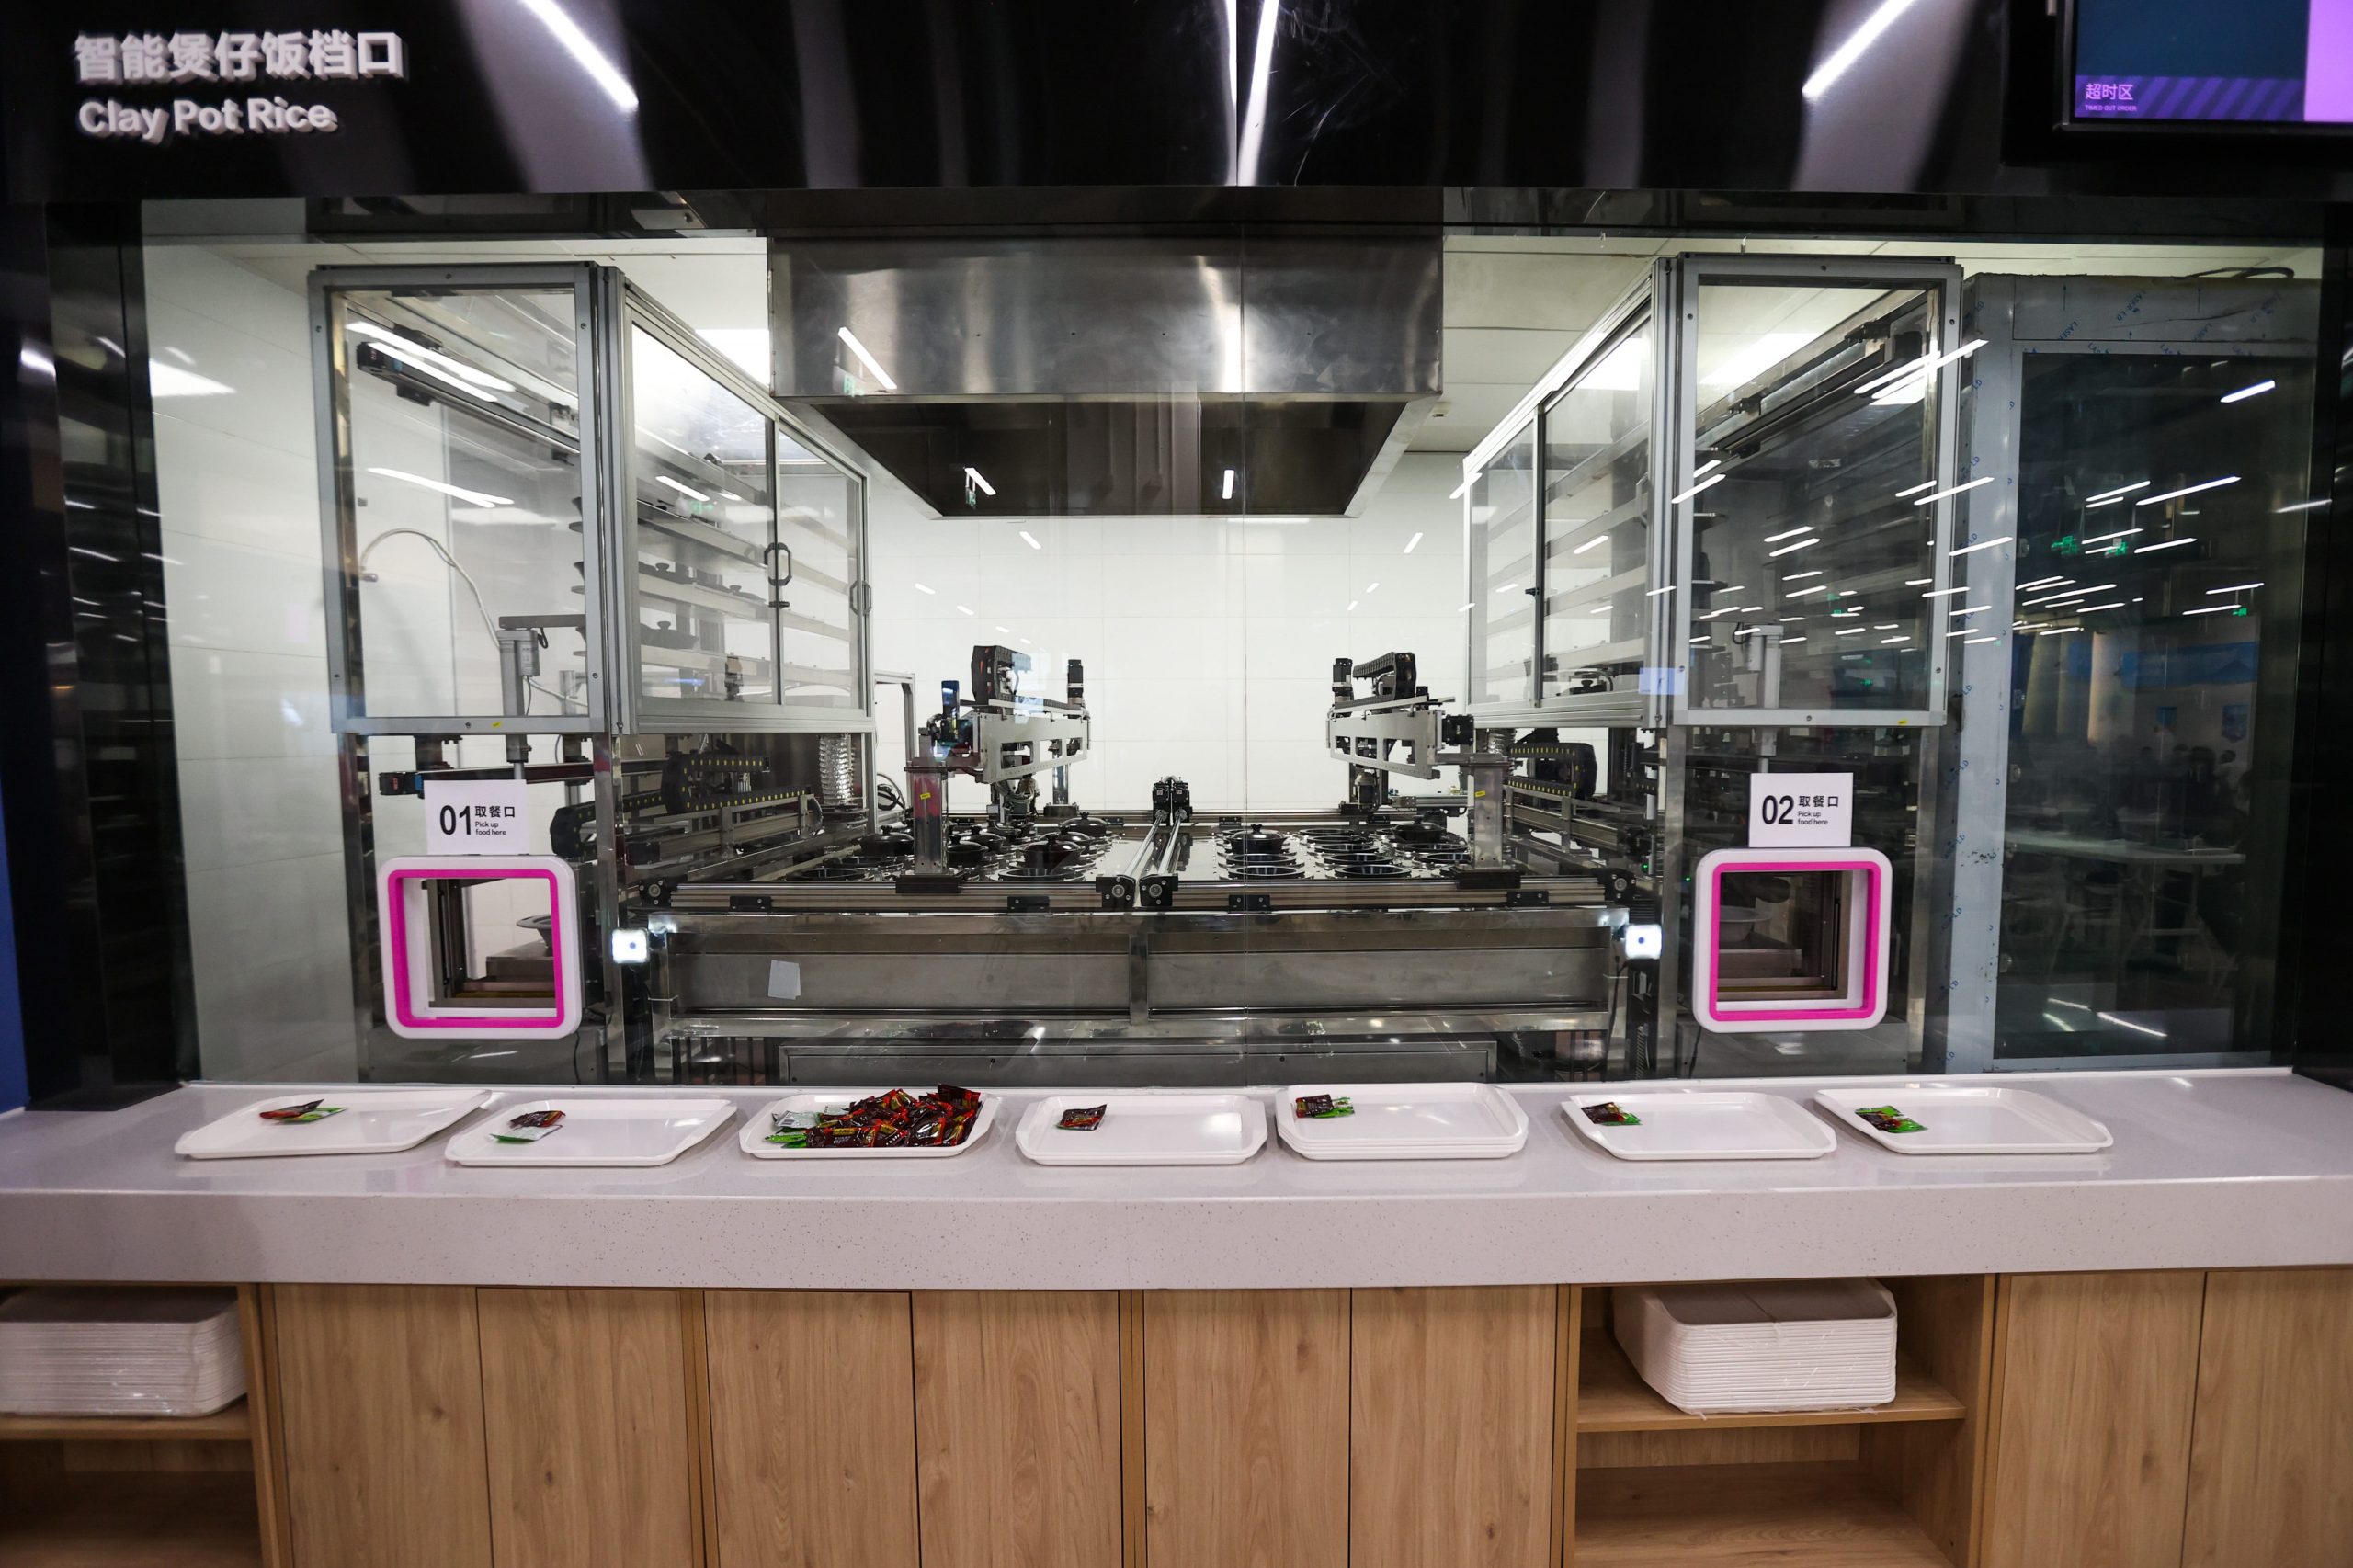 Dishes in the restaurant will be prepared by robots in an automated kitchen